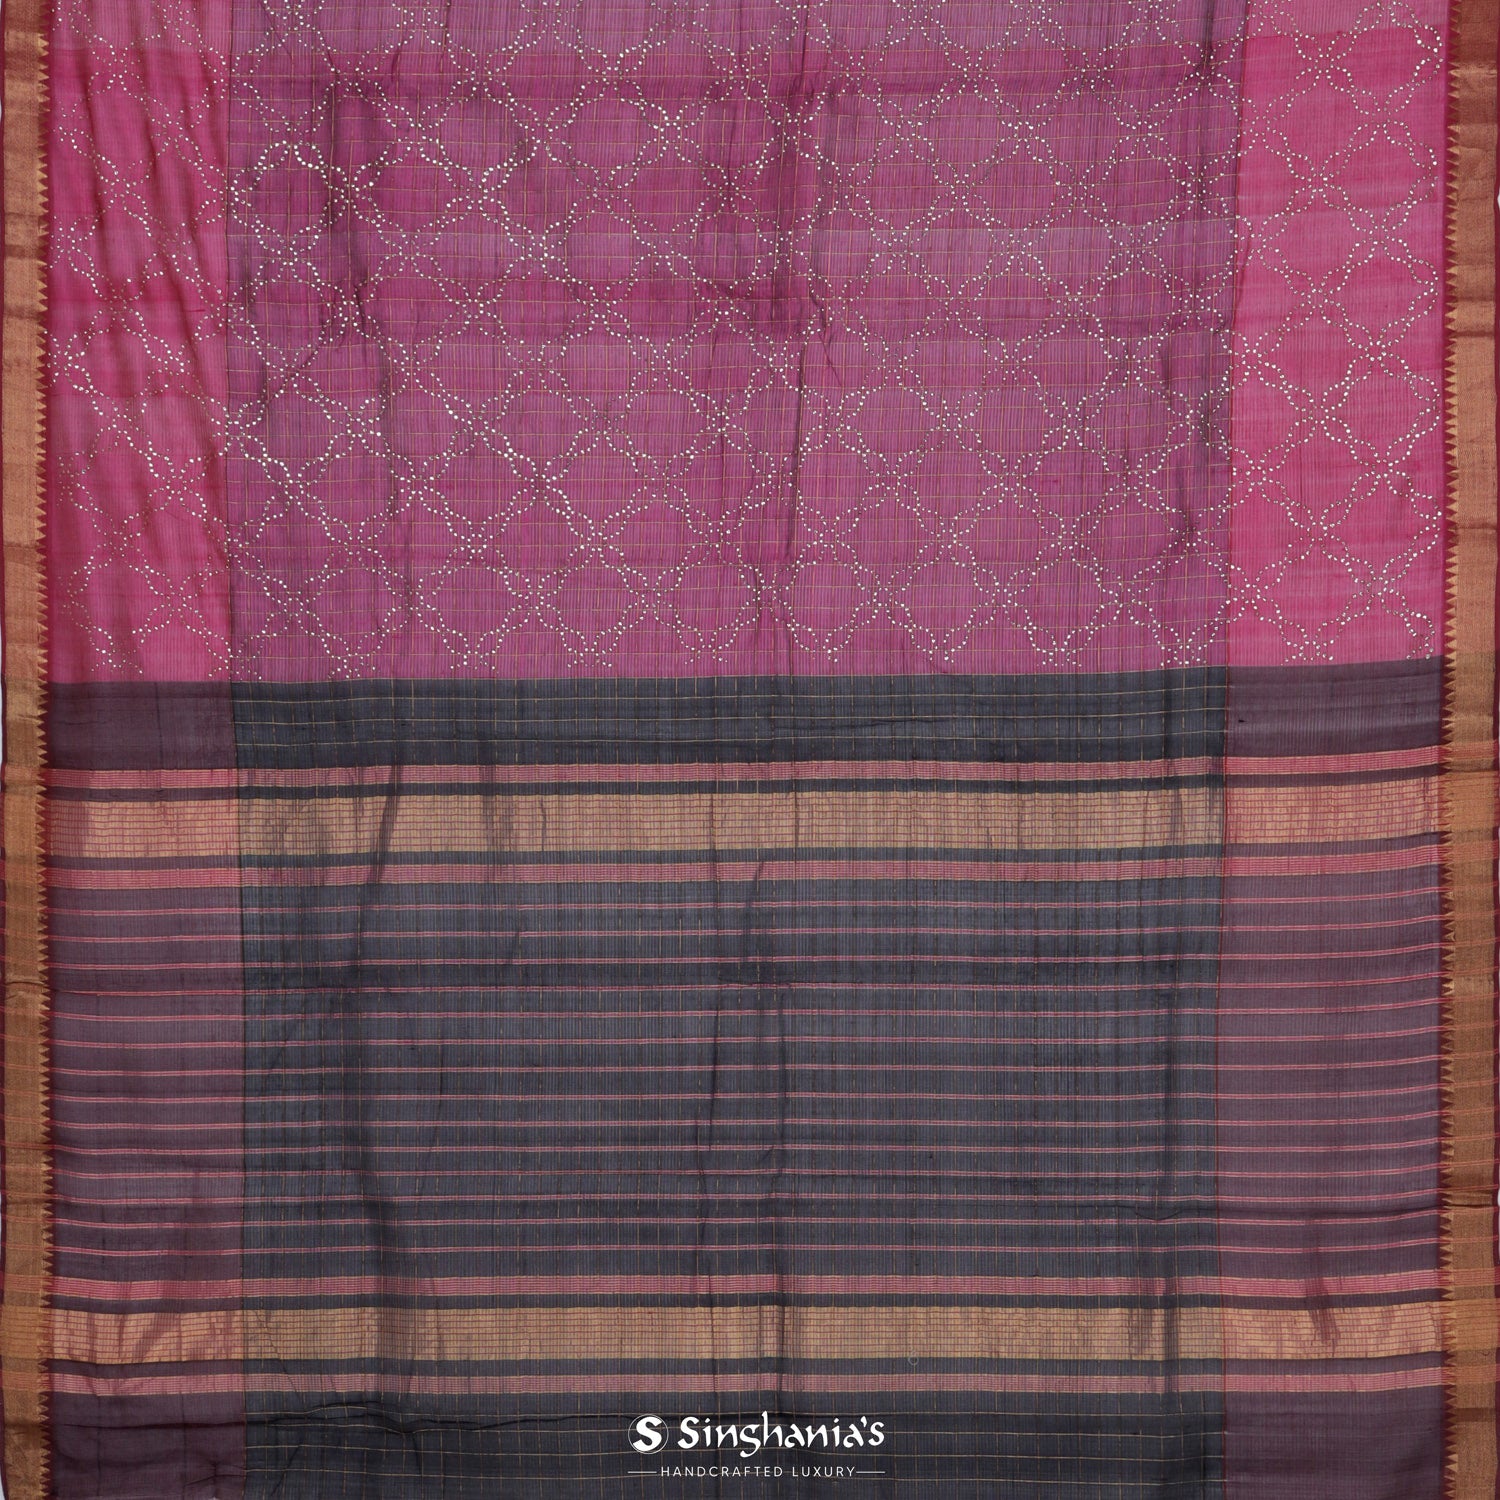 Rouge Pink Silk Saree With Mukaish Work In Floral Grid Pattern